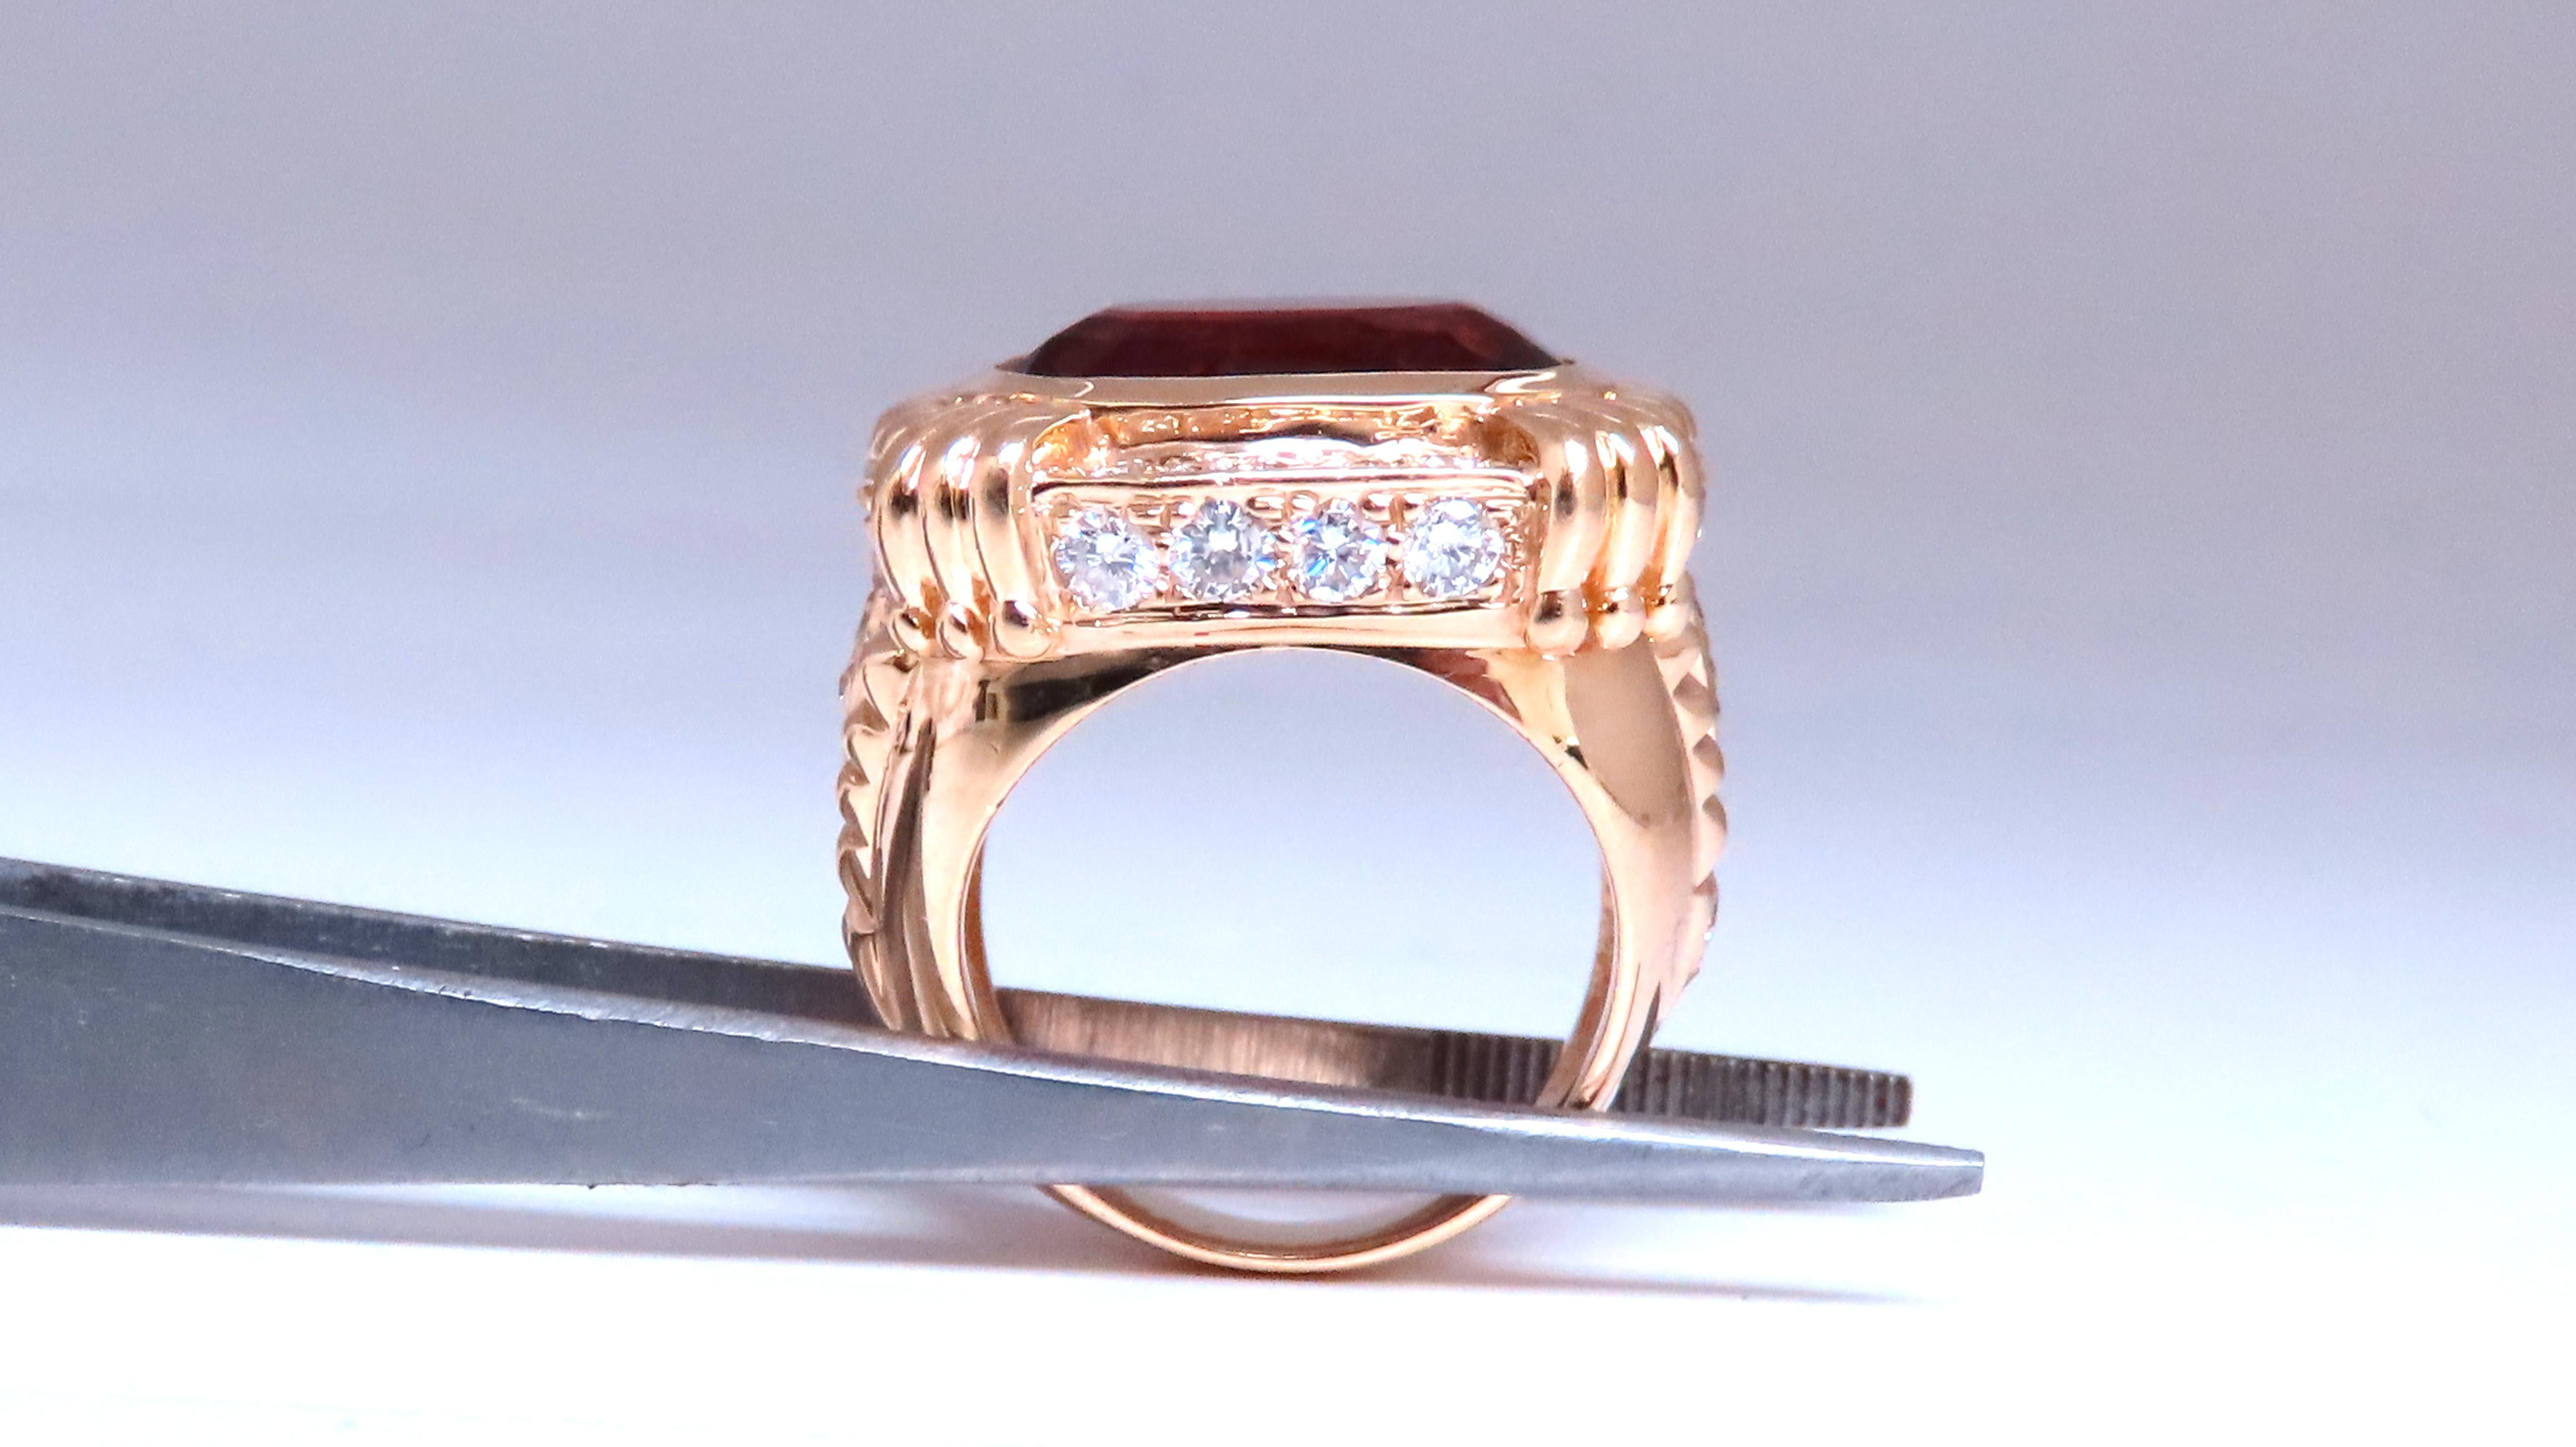 Natural Spessartite Diamonds Ring Bead Goth Stud 14Kt Gold Ref 12297 In Excellent Condition For Sale In New York, NY